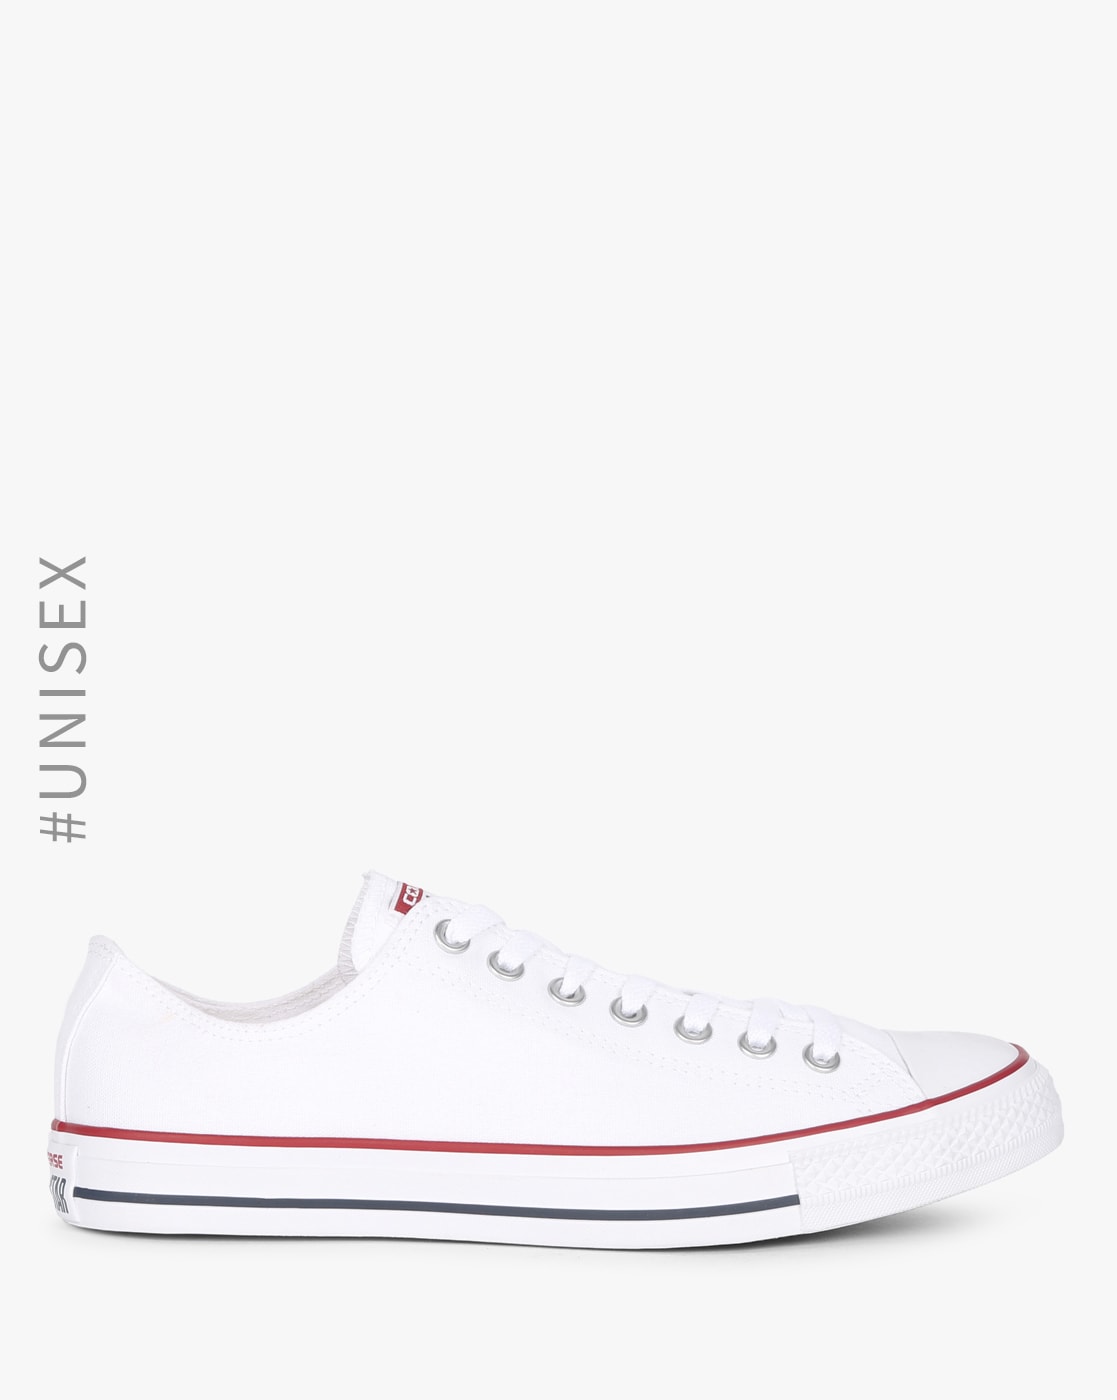 buy converse slippers online india